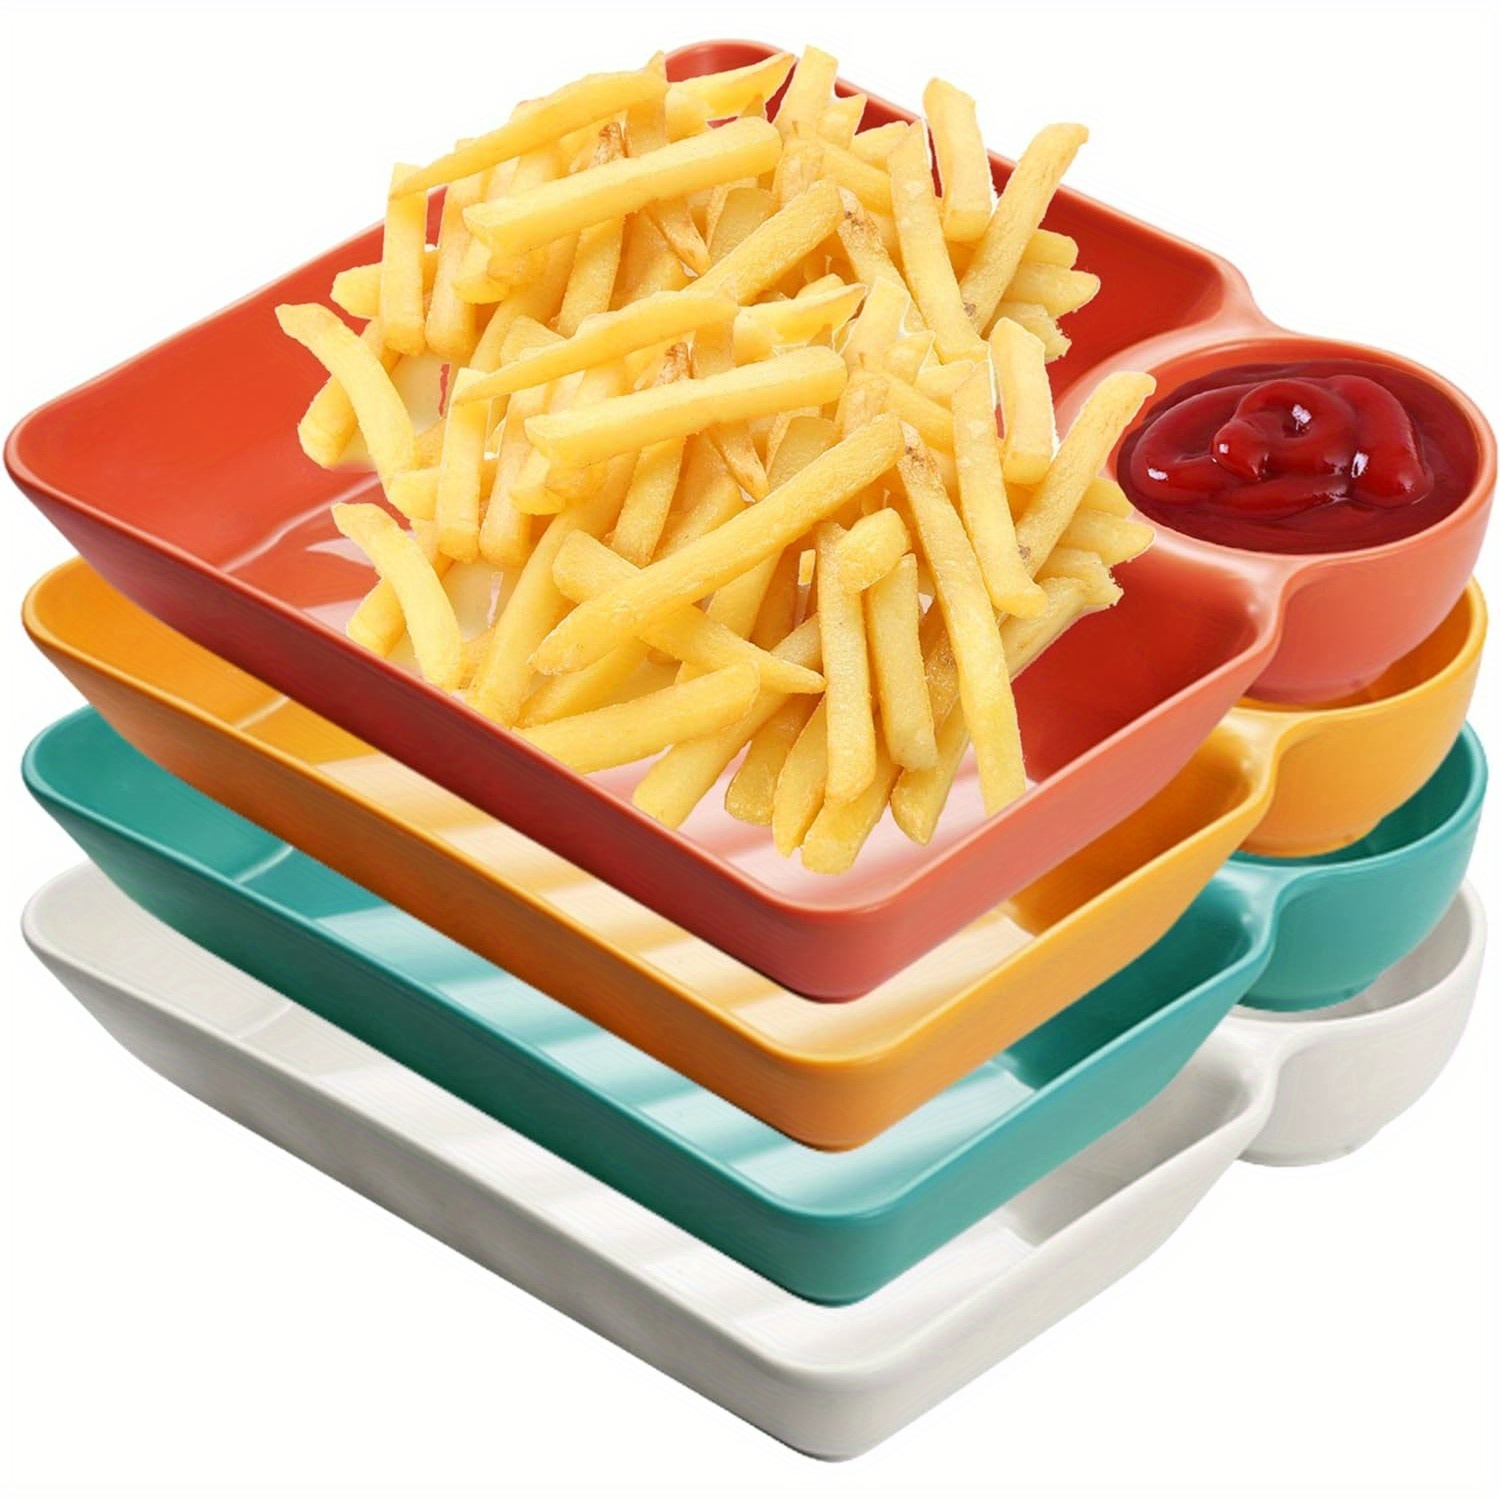 

Plastic Chip & Dip Tray Set With Sauce Holder, Durable High-temperature Resistant Material, Non-slip Design, Perfect For Restaurants, Home, Picnics - Pack Of 1